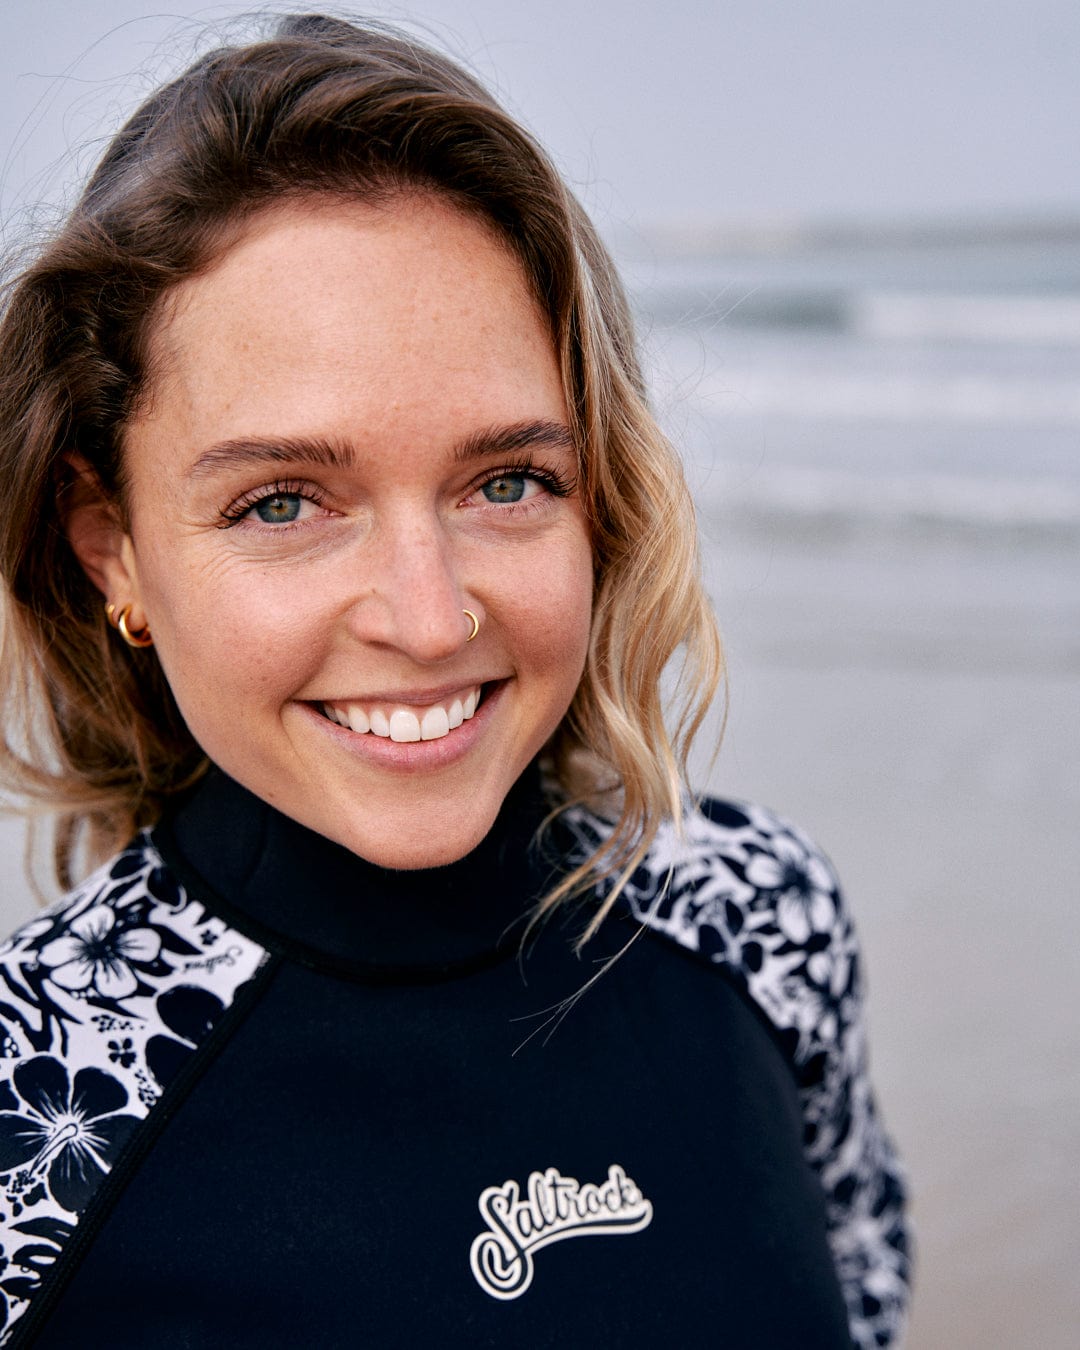 A smiling woman with blue eyes and a nose ring, wearing a Hibiscus - Womens Shortie Wetsuit in black with the brand "Saltrock" on the beach.